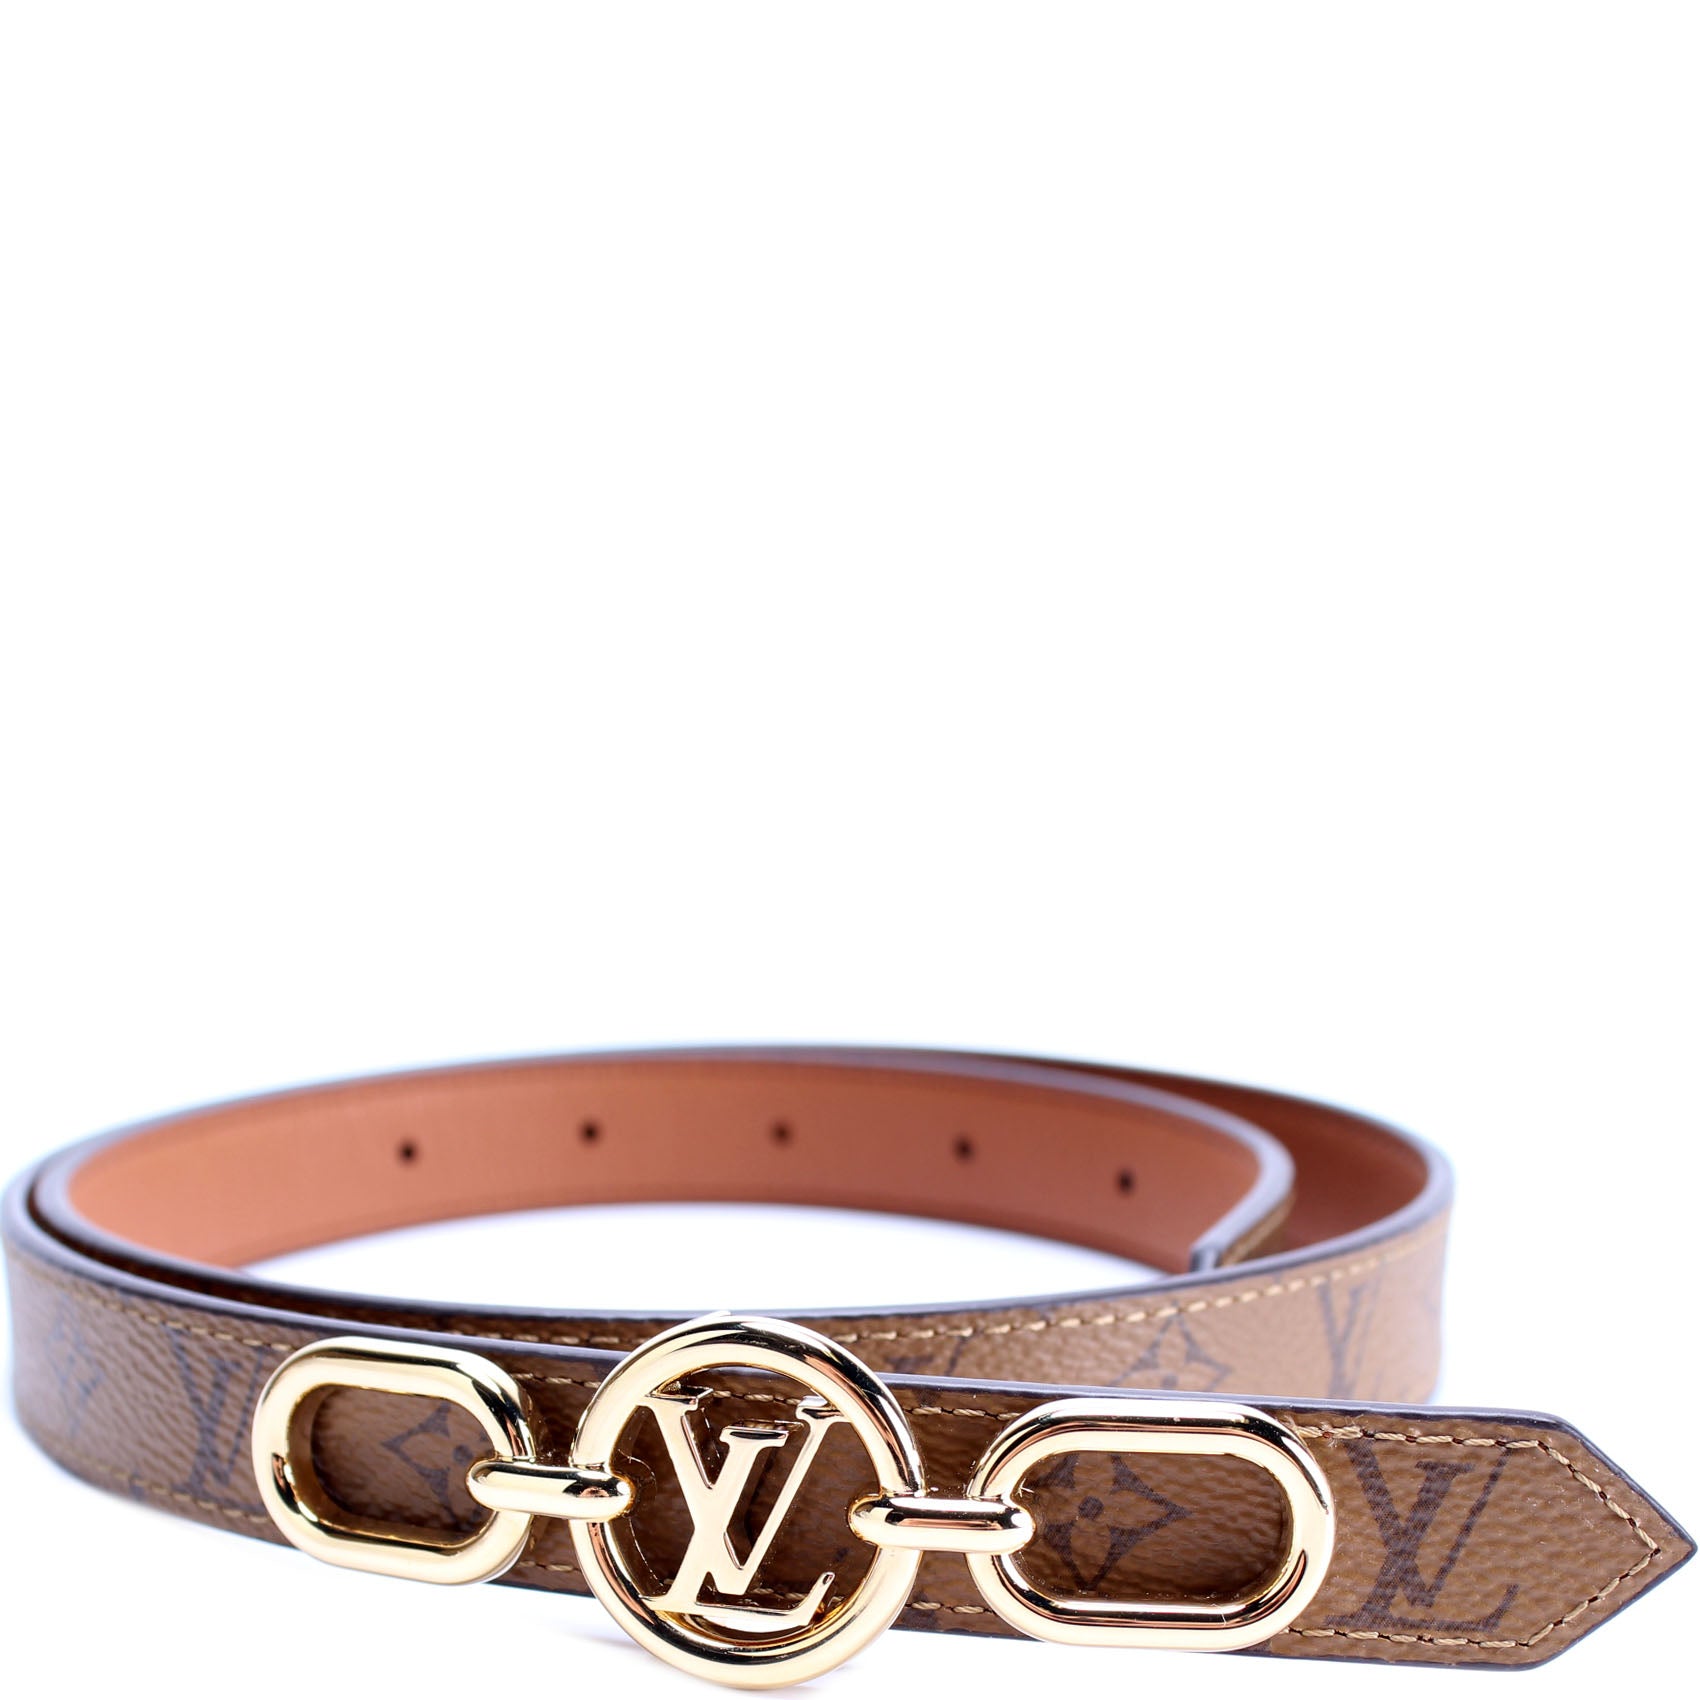 Louis Vuitton reversible red belt with gold circle buckle.